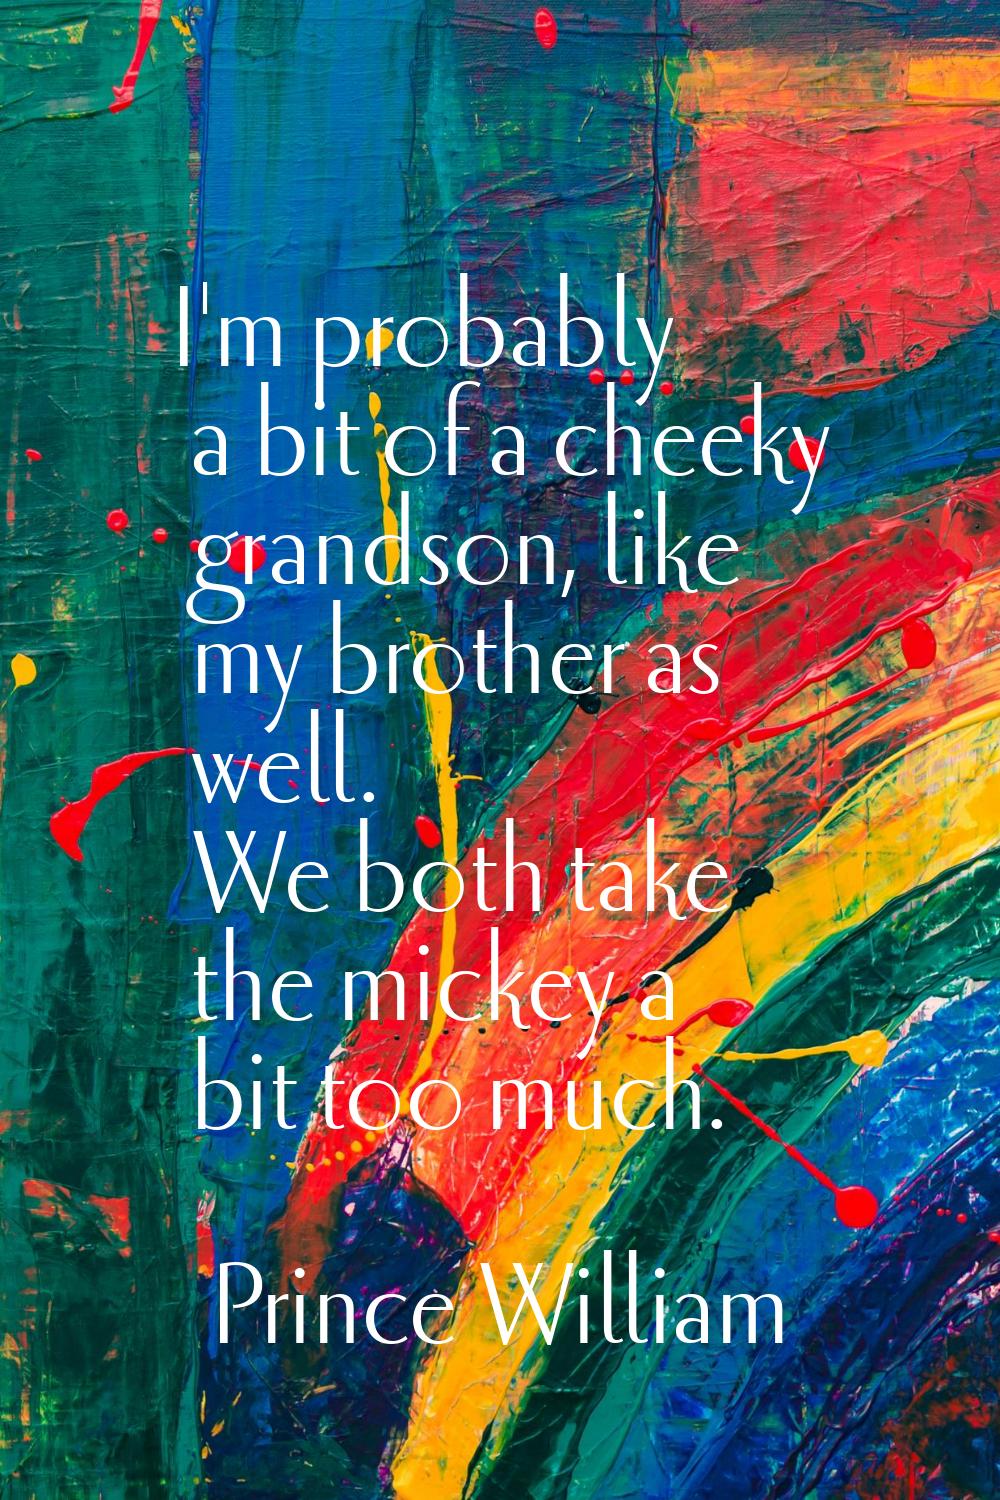 I'm probably a bit of a cheeky grandson, like my brother as well. We both take the mickey a bit too